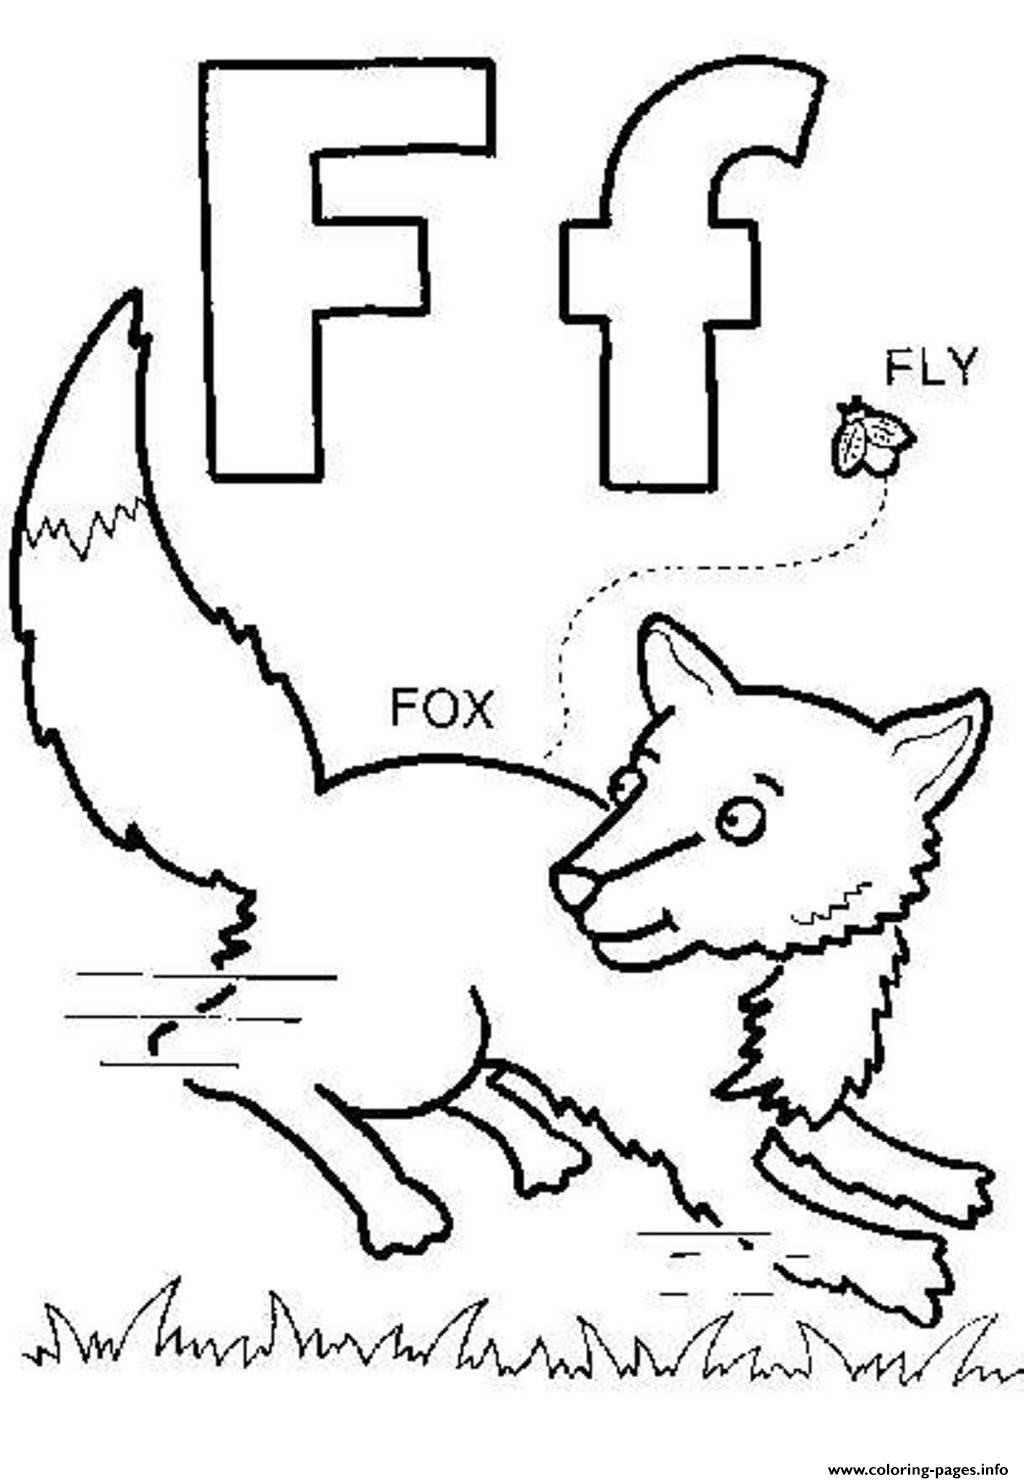 Fox And Fly Free Alphabet Scbf0 Coloring Pages Printable